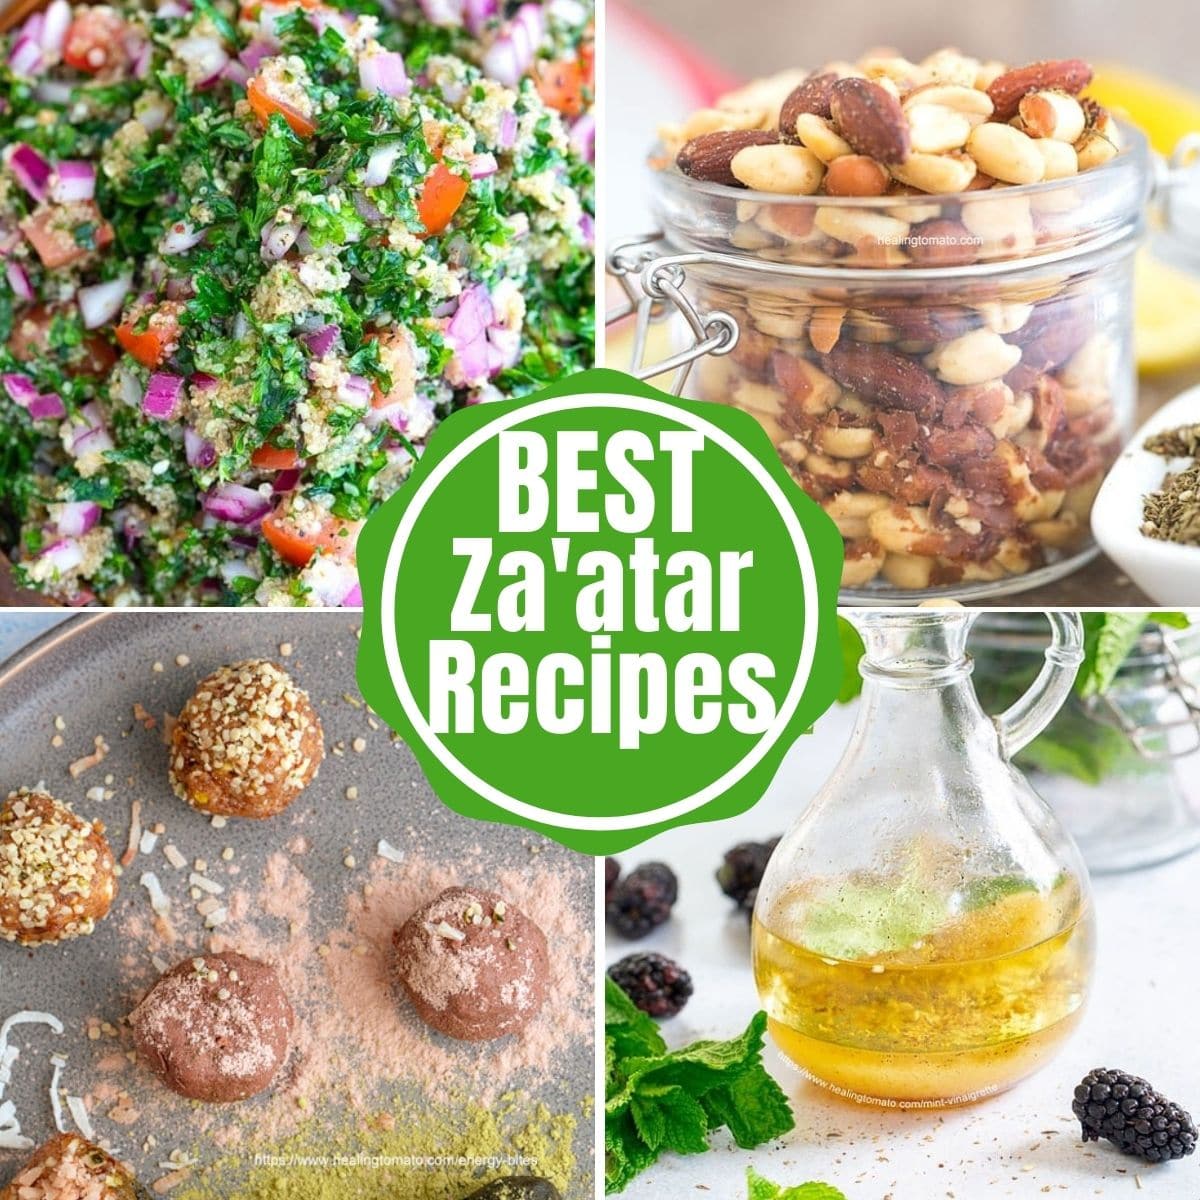 Collage of 4 images with the words "Best Za'atar Recipes" written in the middle